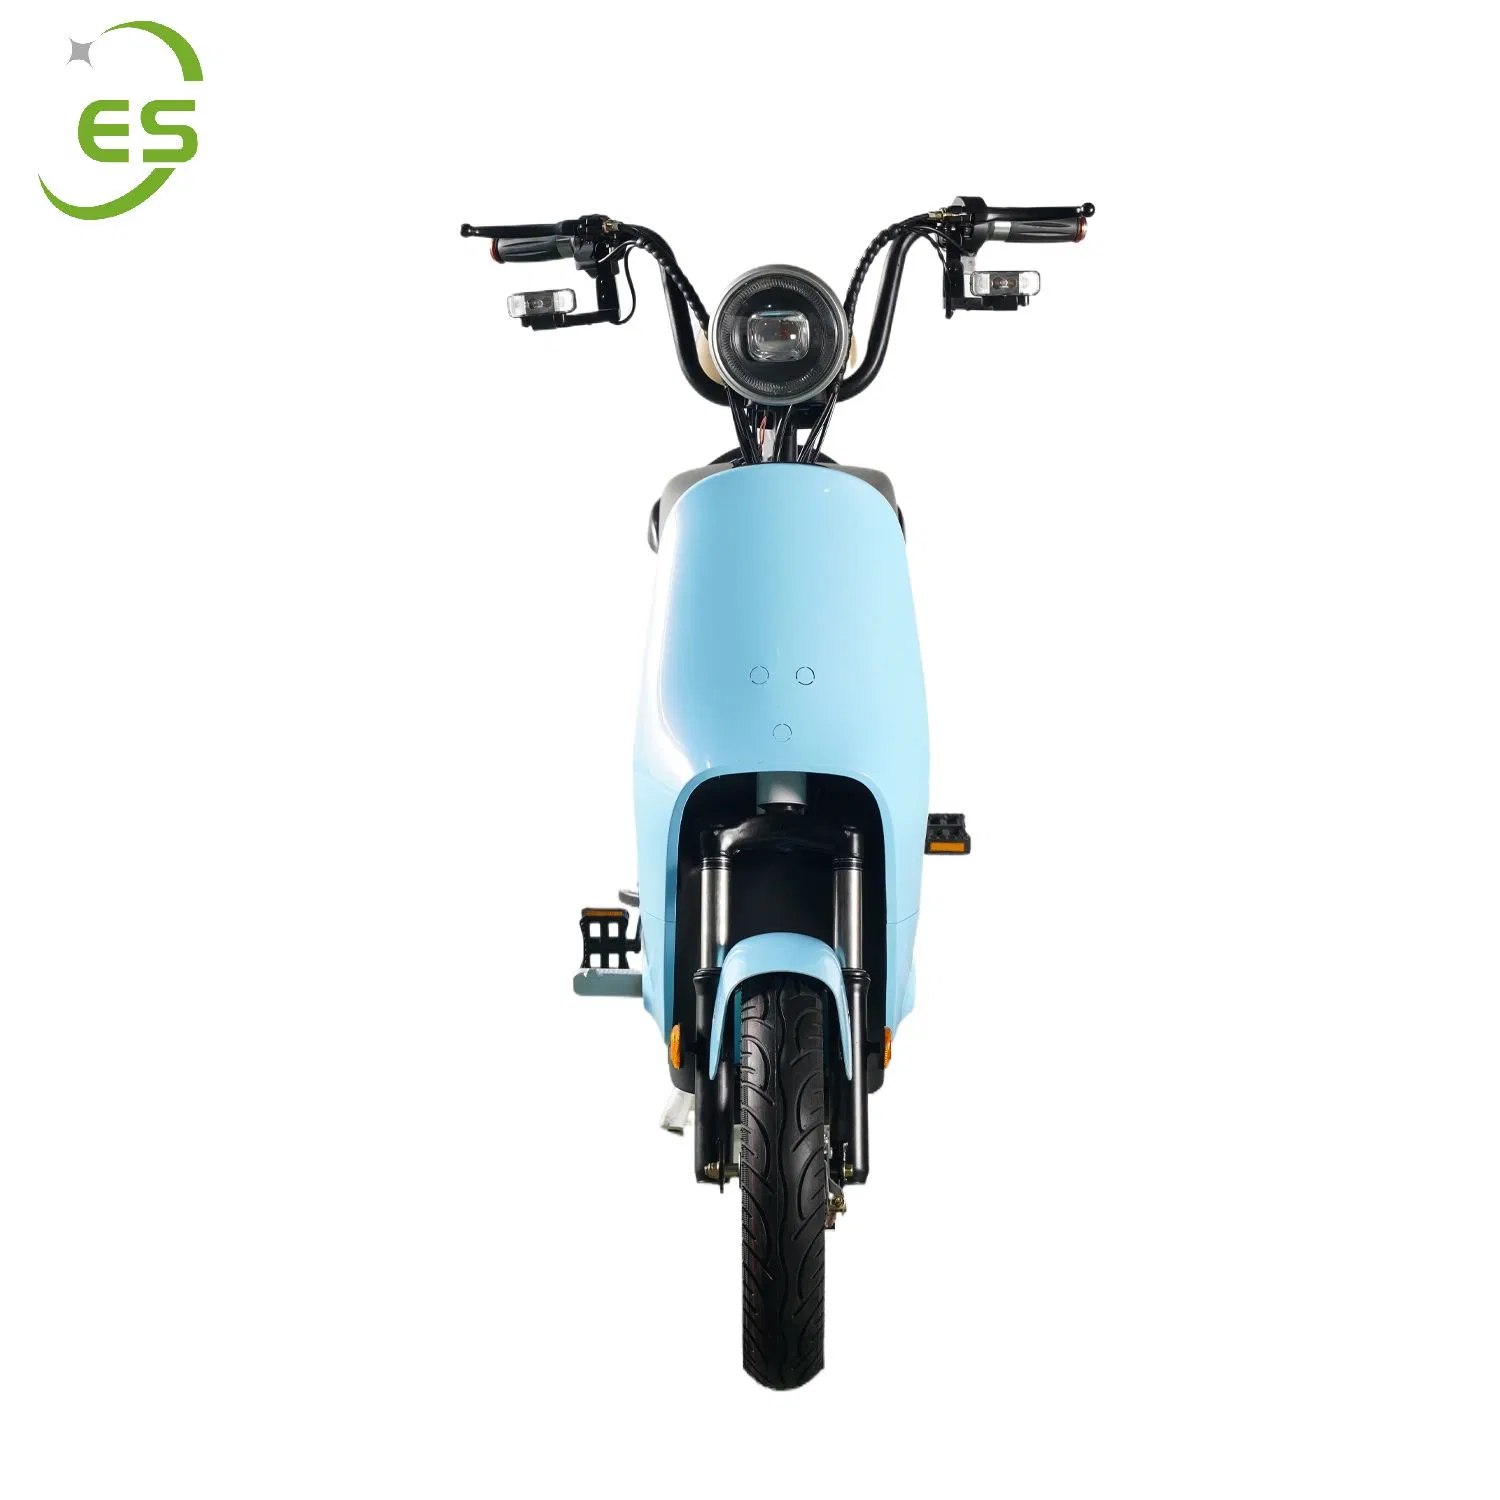 China Price 500W 48V20ah/60V20ah Optional Electric Bicycle Electric Scooter Electric Motorcycle Factory E-Scooter